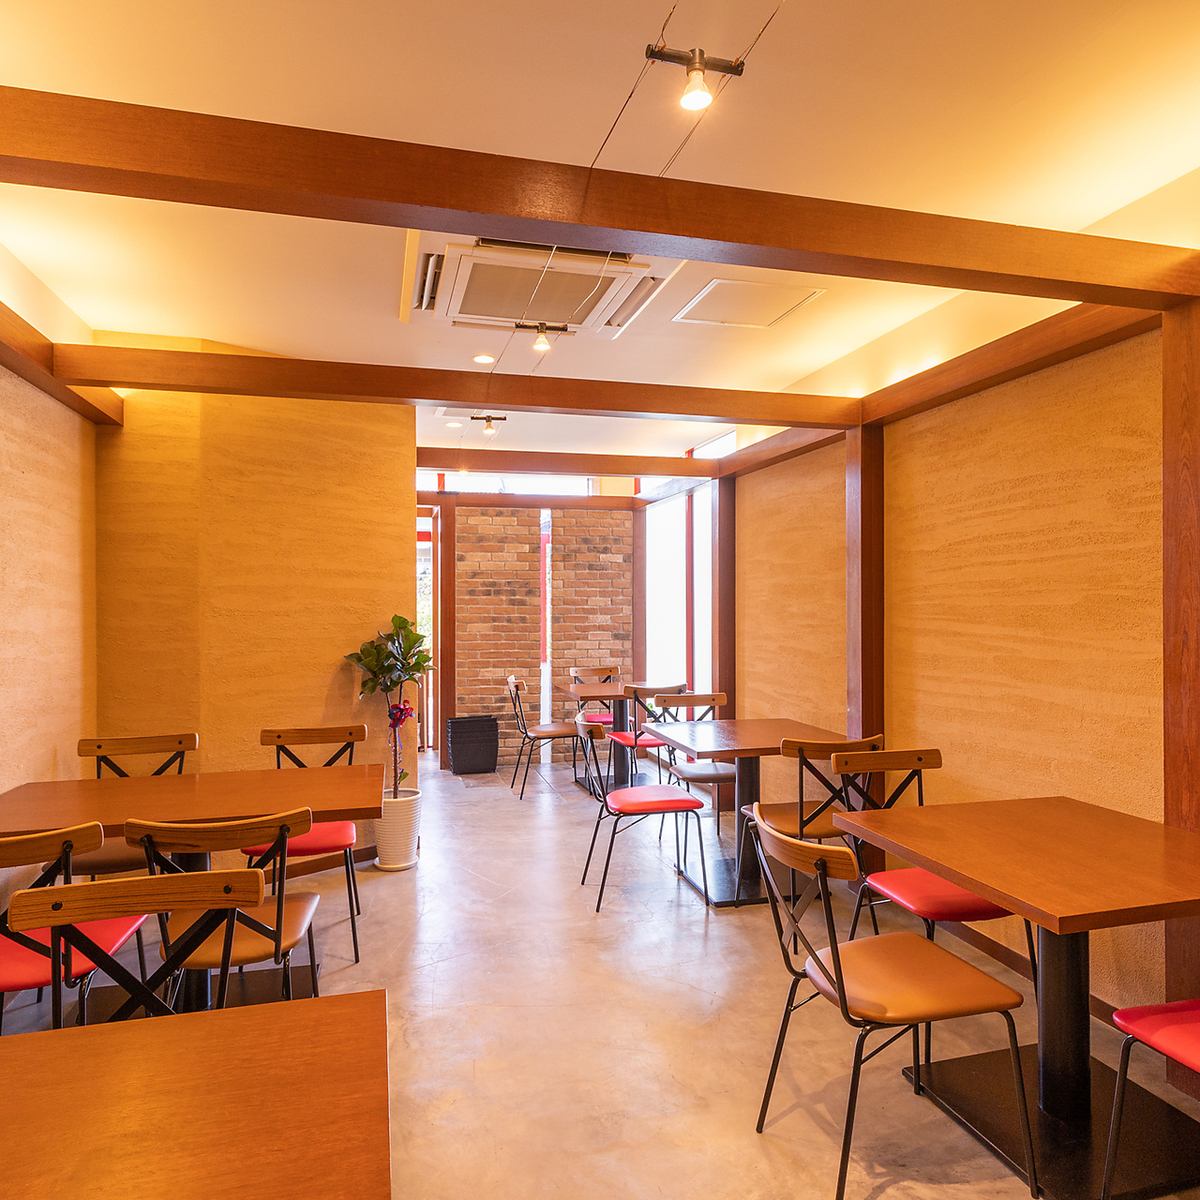 Up to 15 people can be rented ◎ Hospitality with stylish space and authentic Italian cuisine ♪